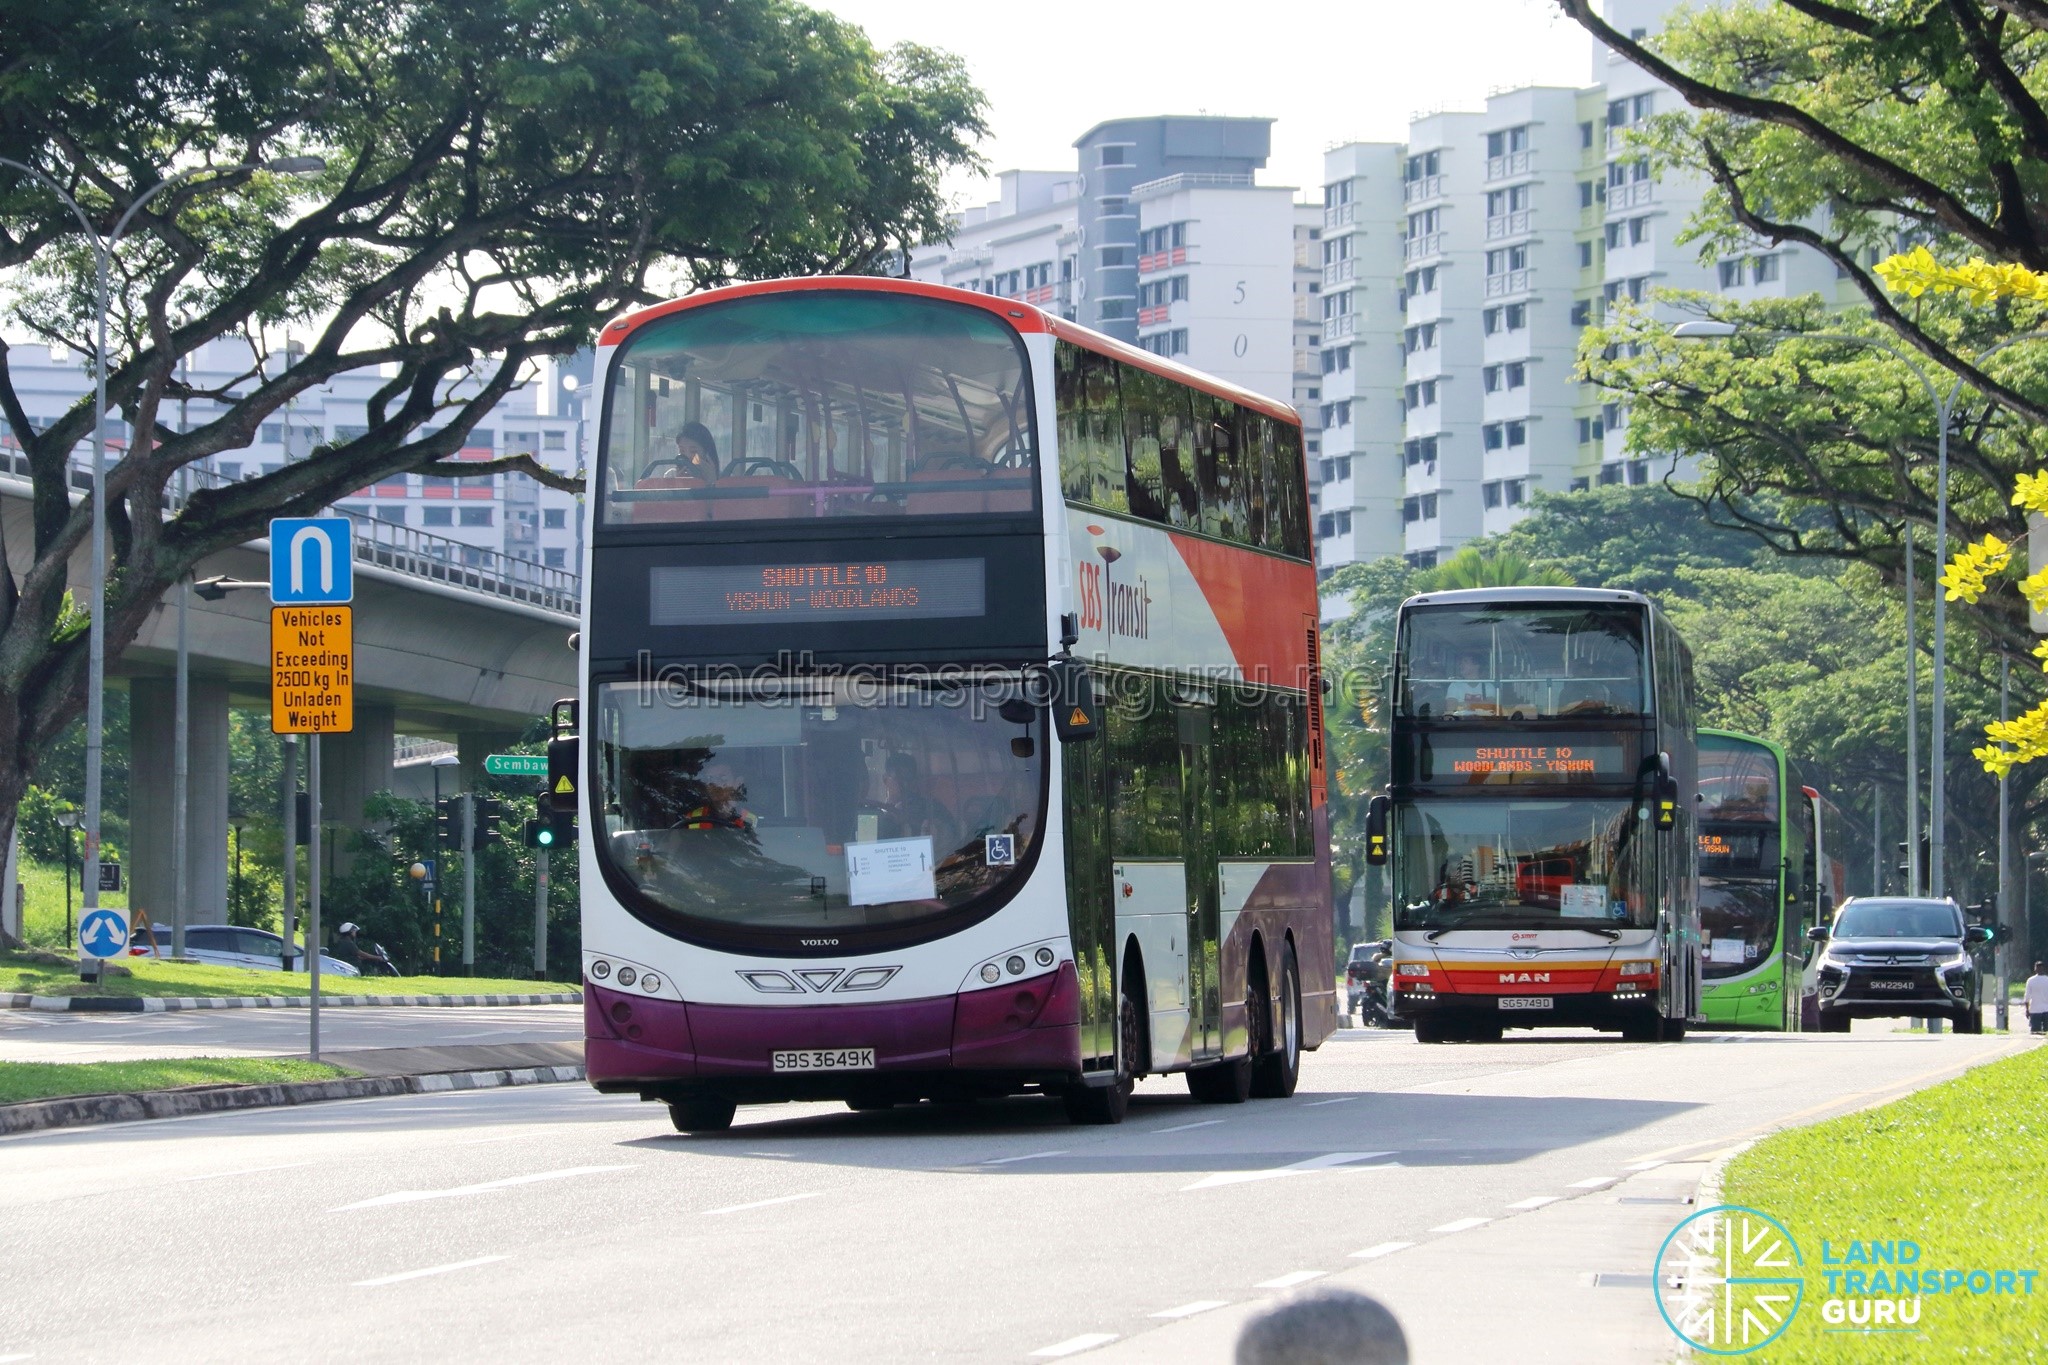 Shuttle 10 buses in action